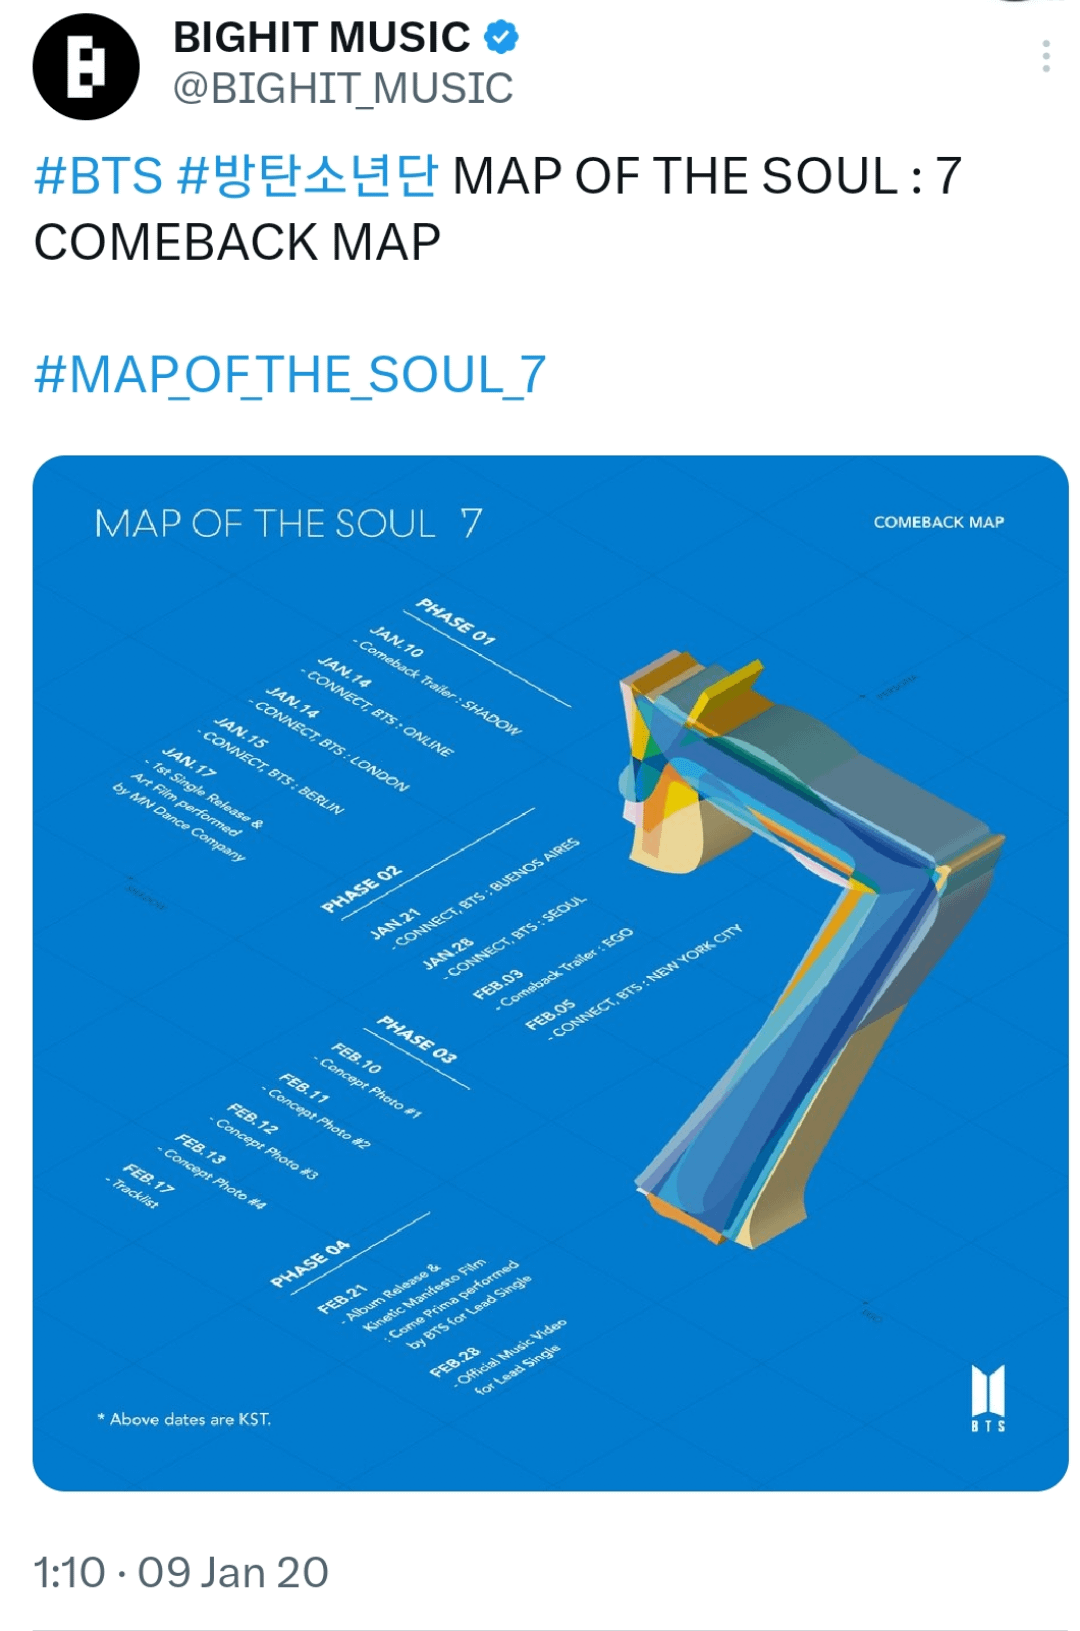 4 years ago today, the Map of The Soul: 7 Comeback Map was released